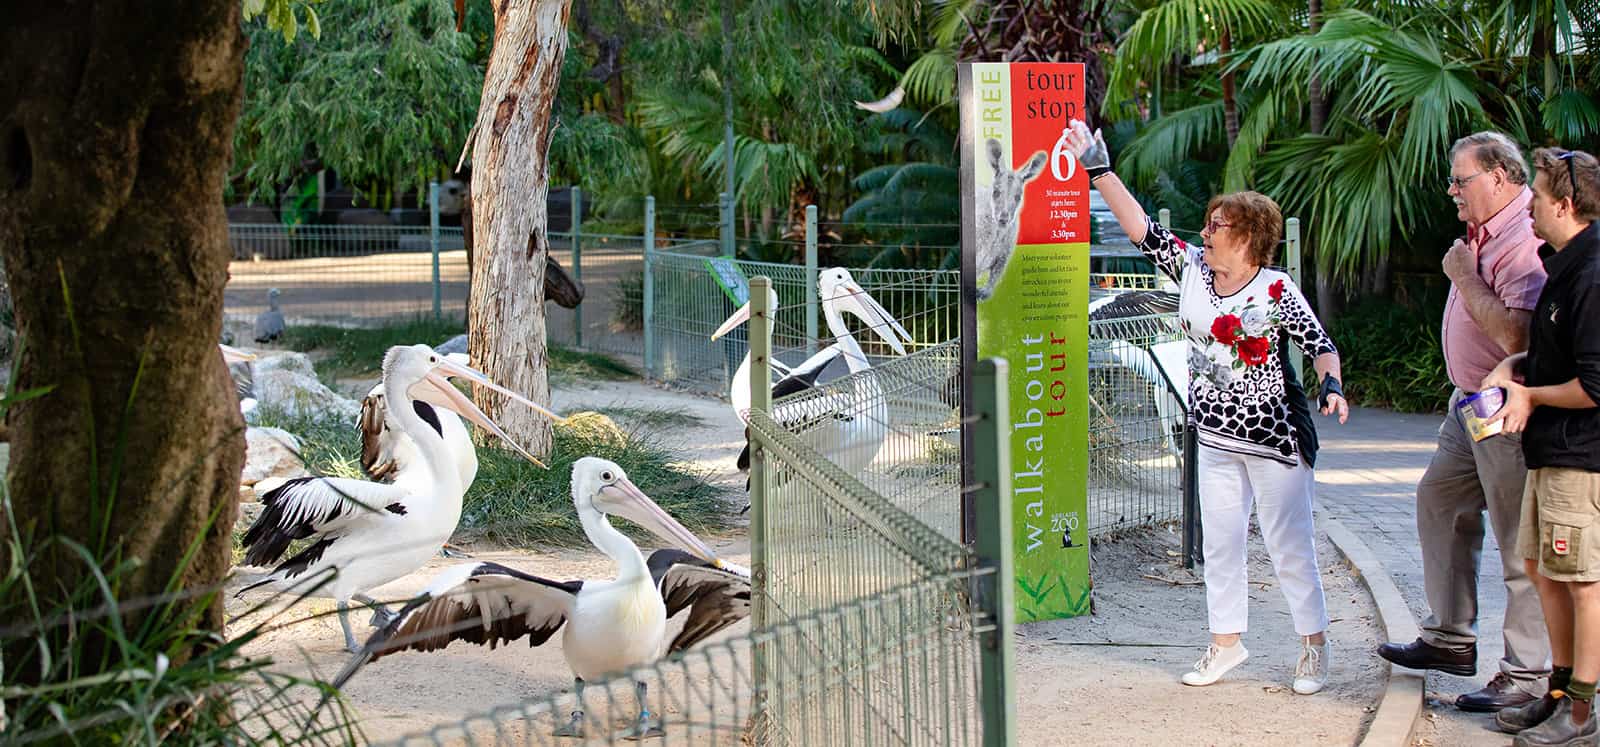 Pelicans at Adelaide Zoo